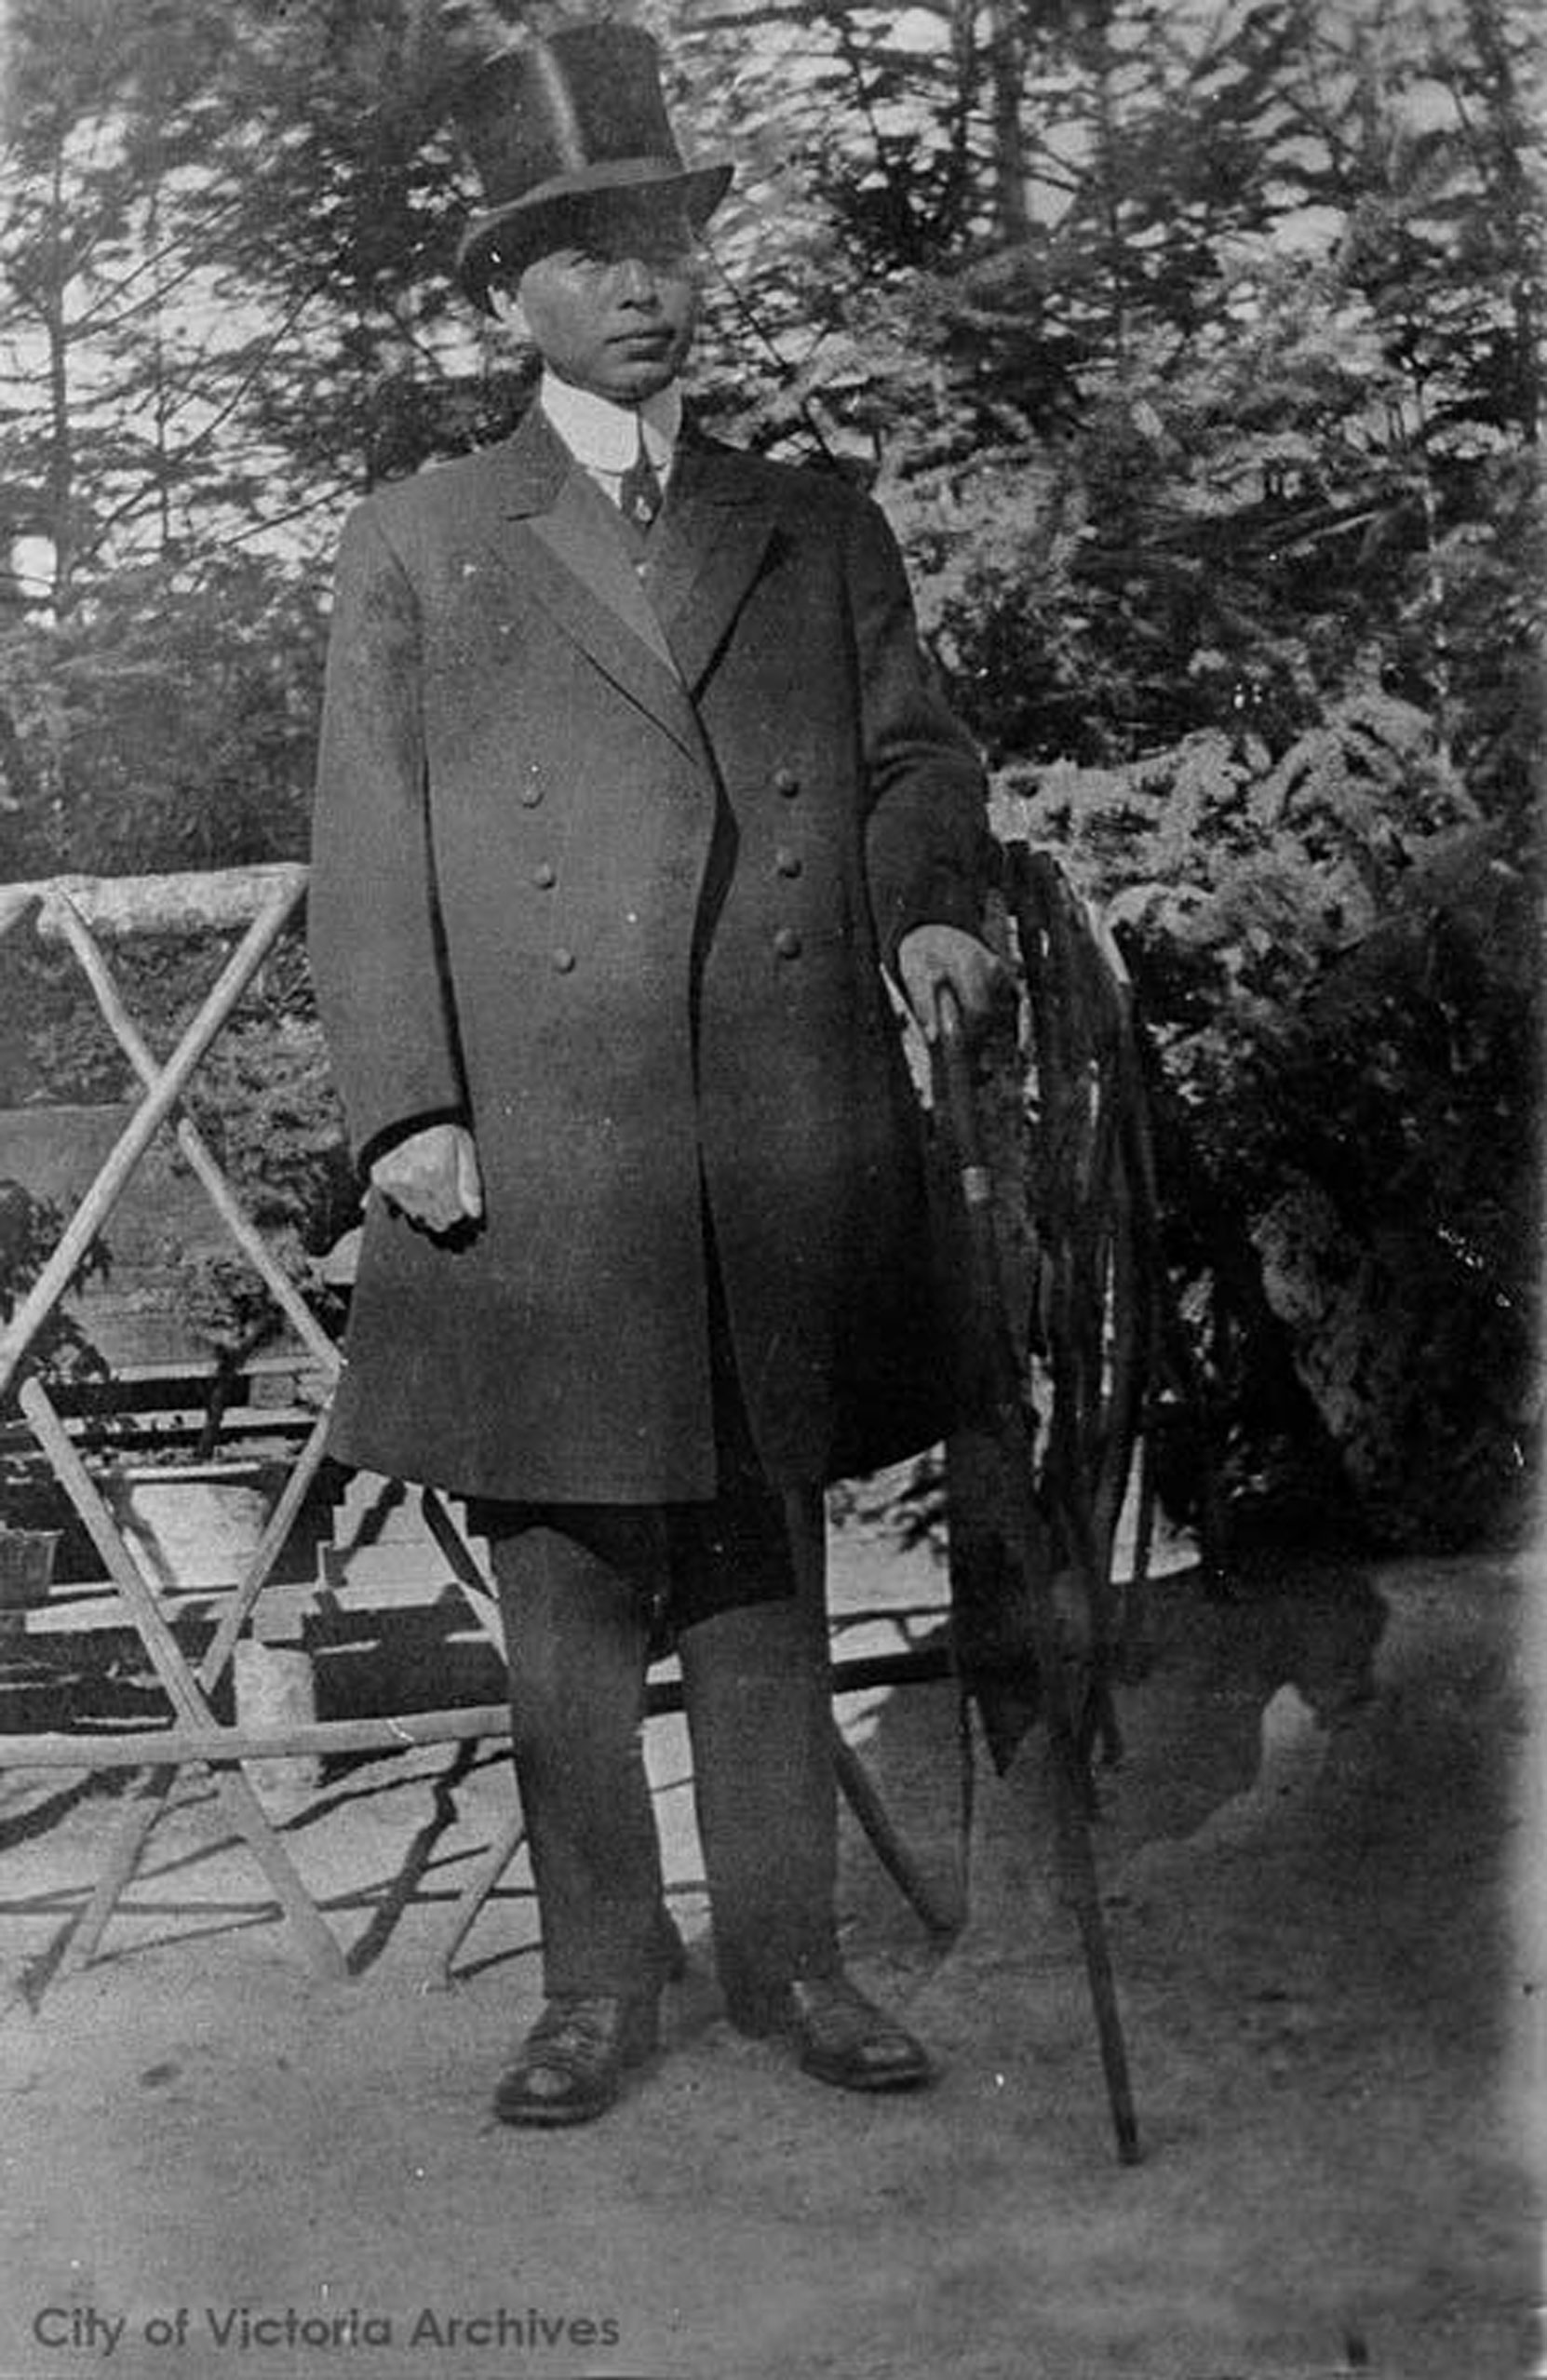 Harry Takata, one of the owners of the Japanese Tea Garden at Gorge Park, circa 1912. (City of Victoria Archives photo M07760)